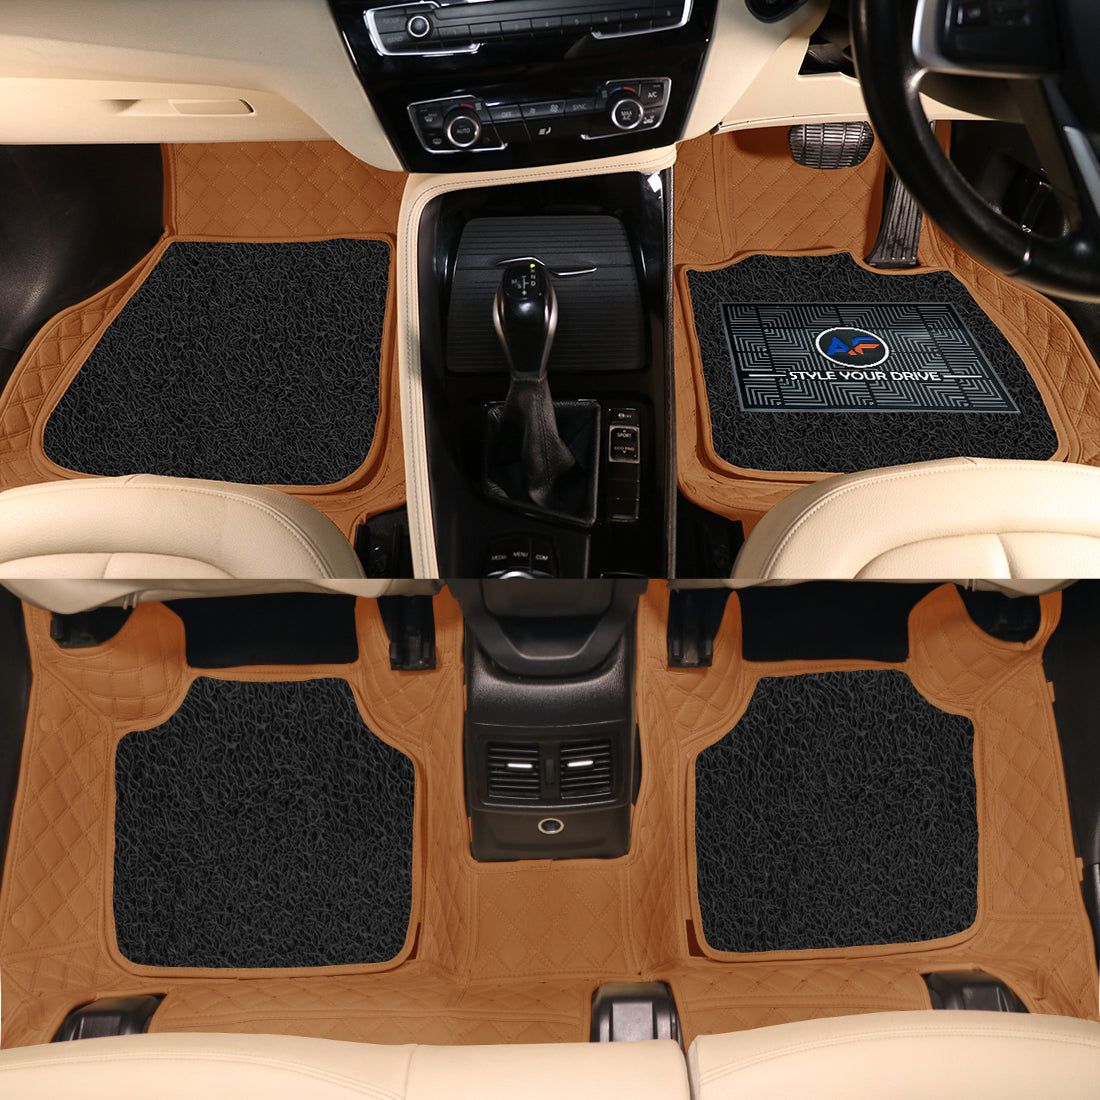 Porsche Cayenne 2017 7D Luxury Car Mat, All Weather Proof, Anti-Skid, 100% Waterproof & Odorless with Unique Diamond Fish Design (24mm Luxury PU Leather, 2 Rows)